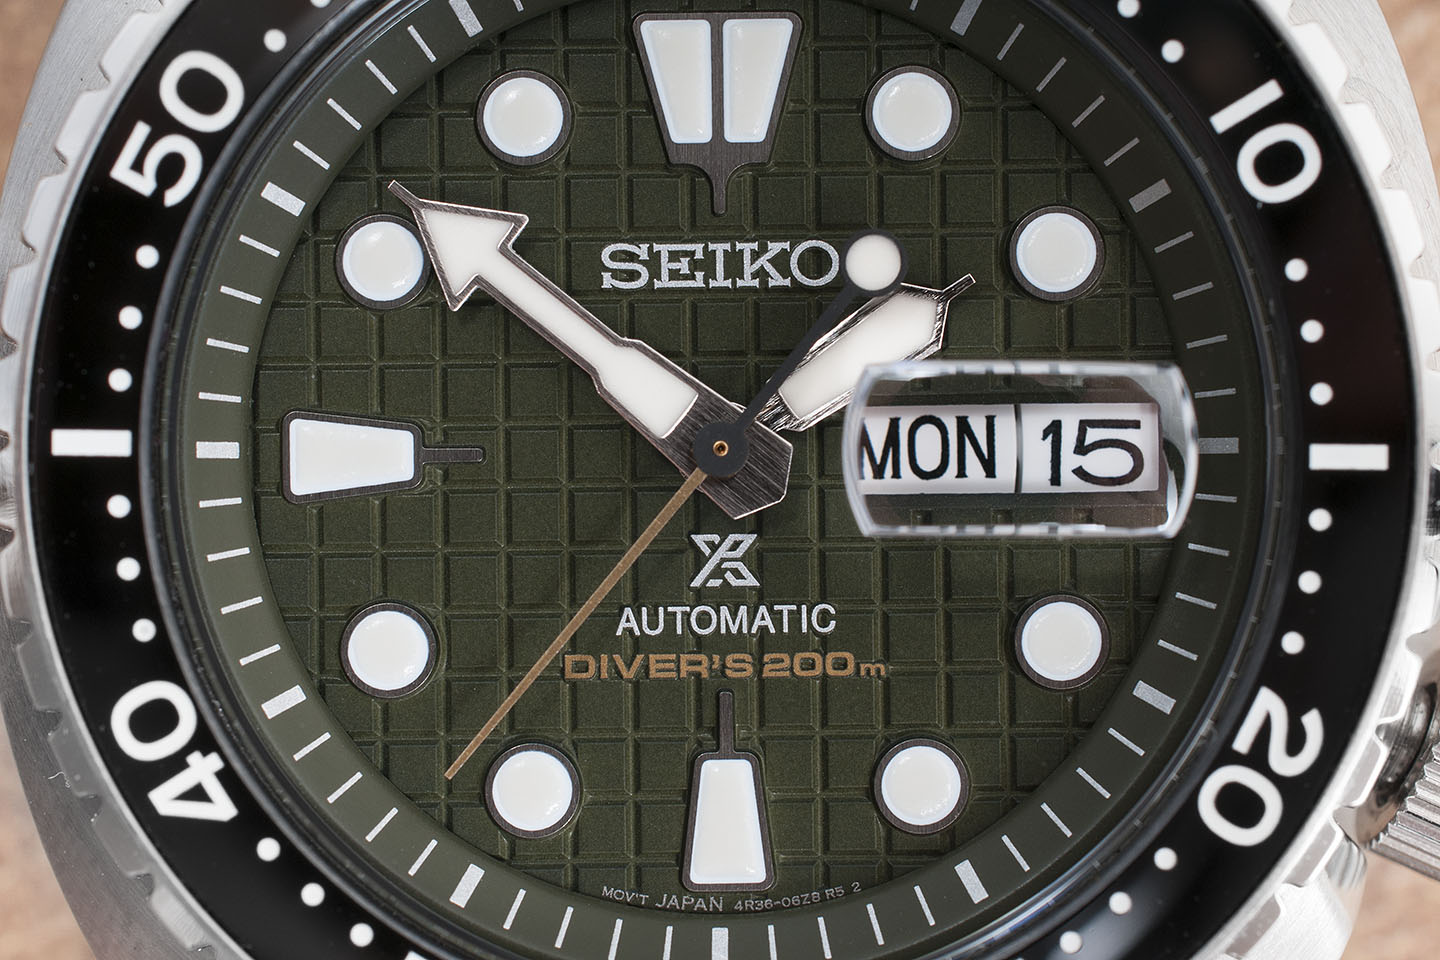 Seiko Turtle Grenade Watch Review - SRPE05 (SBDY051) StrapHabit